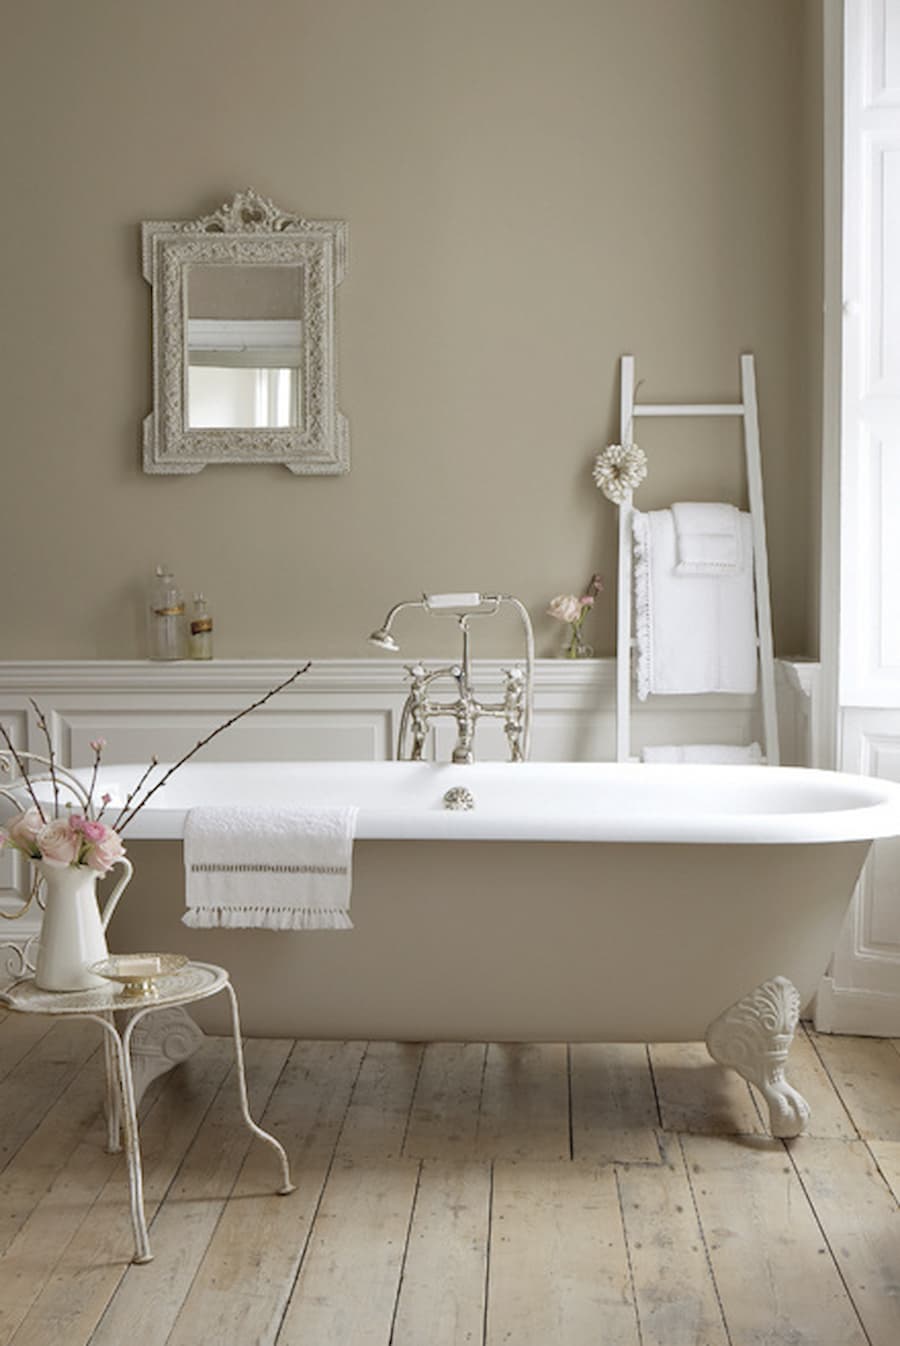 Free standing roll top bath situated in a bathroom that is painted in Little Greene Rolling Fog, a warm beige tone